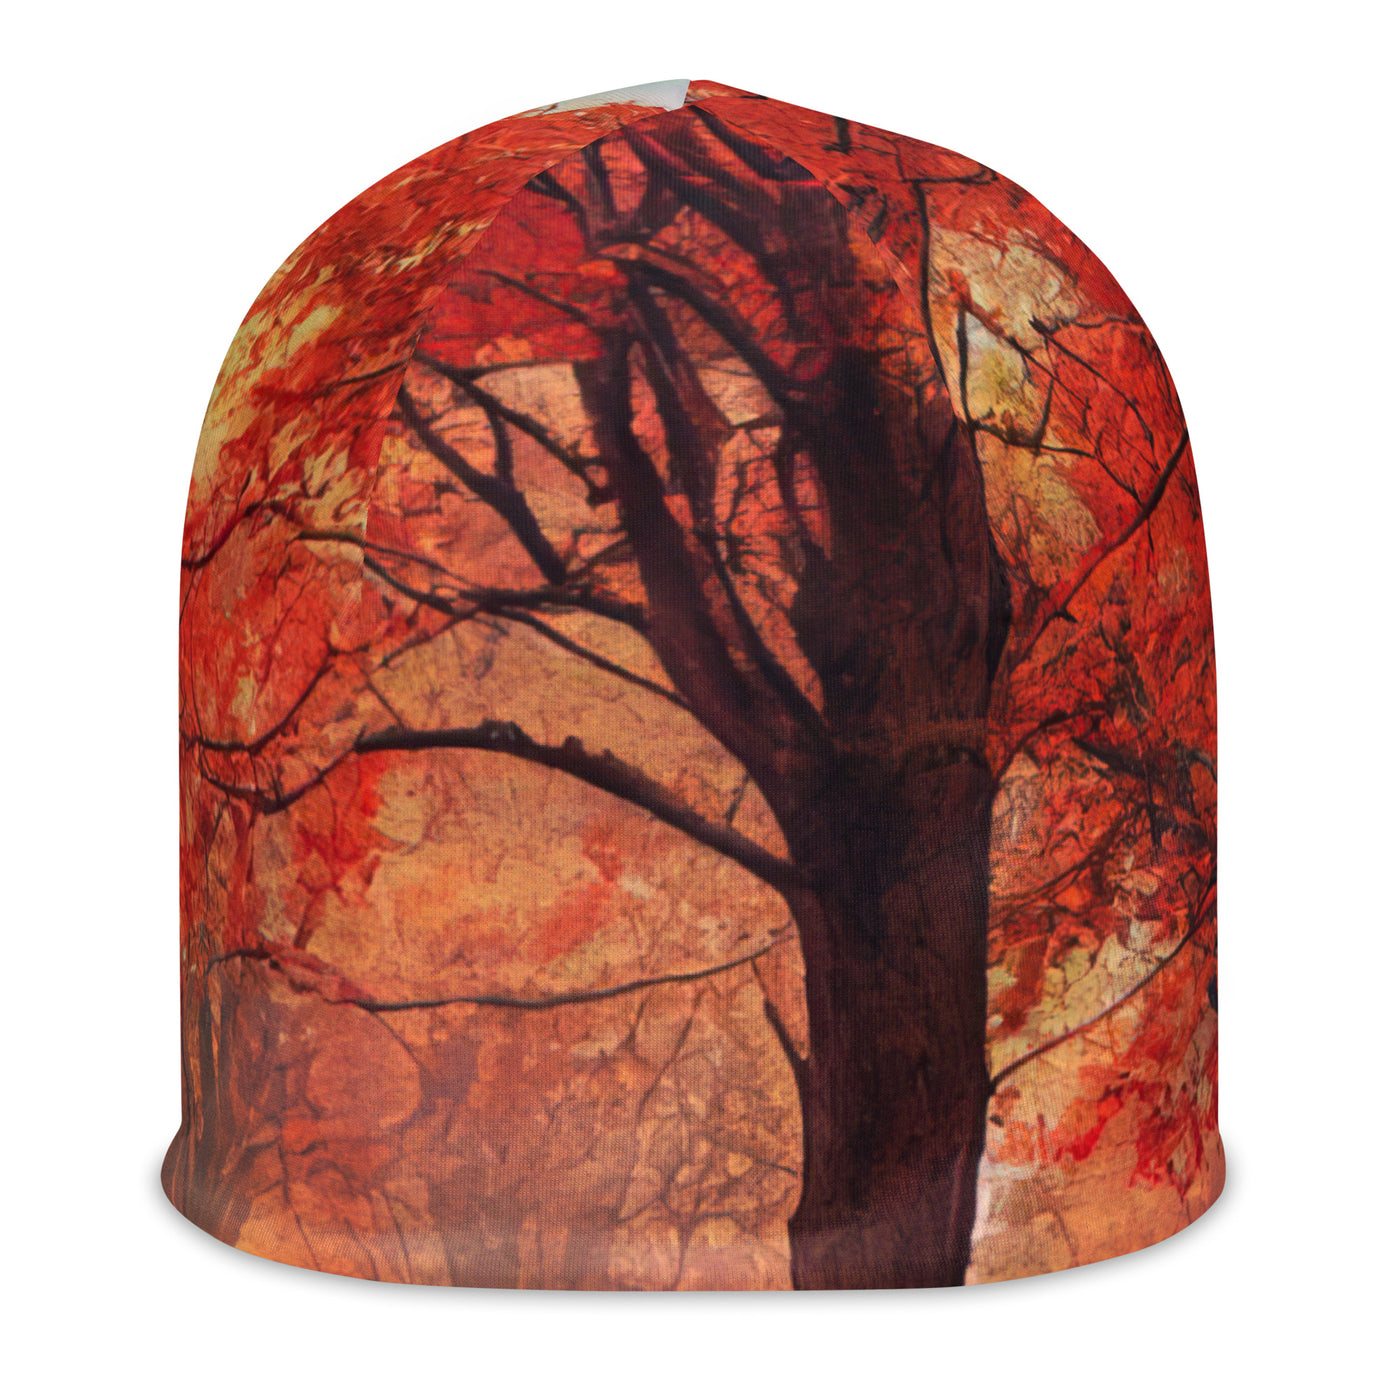 Wald im Herbst - Rote Herbstblätter - Beanie (All-Over Print) camping xxx L